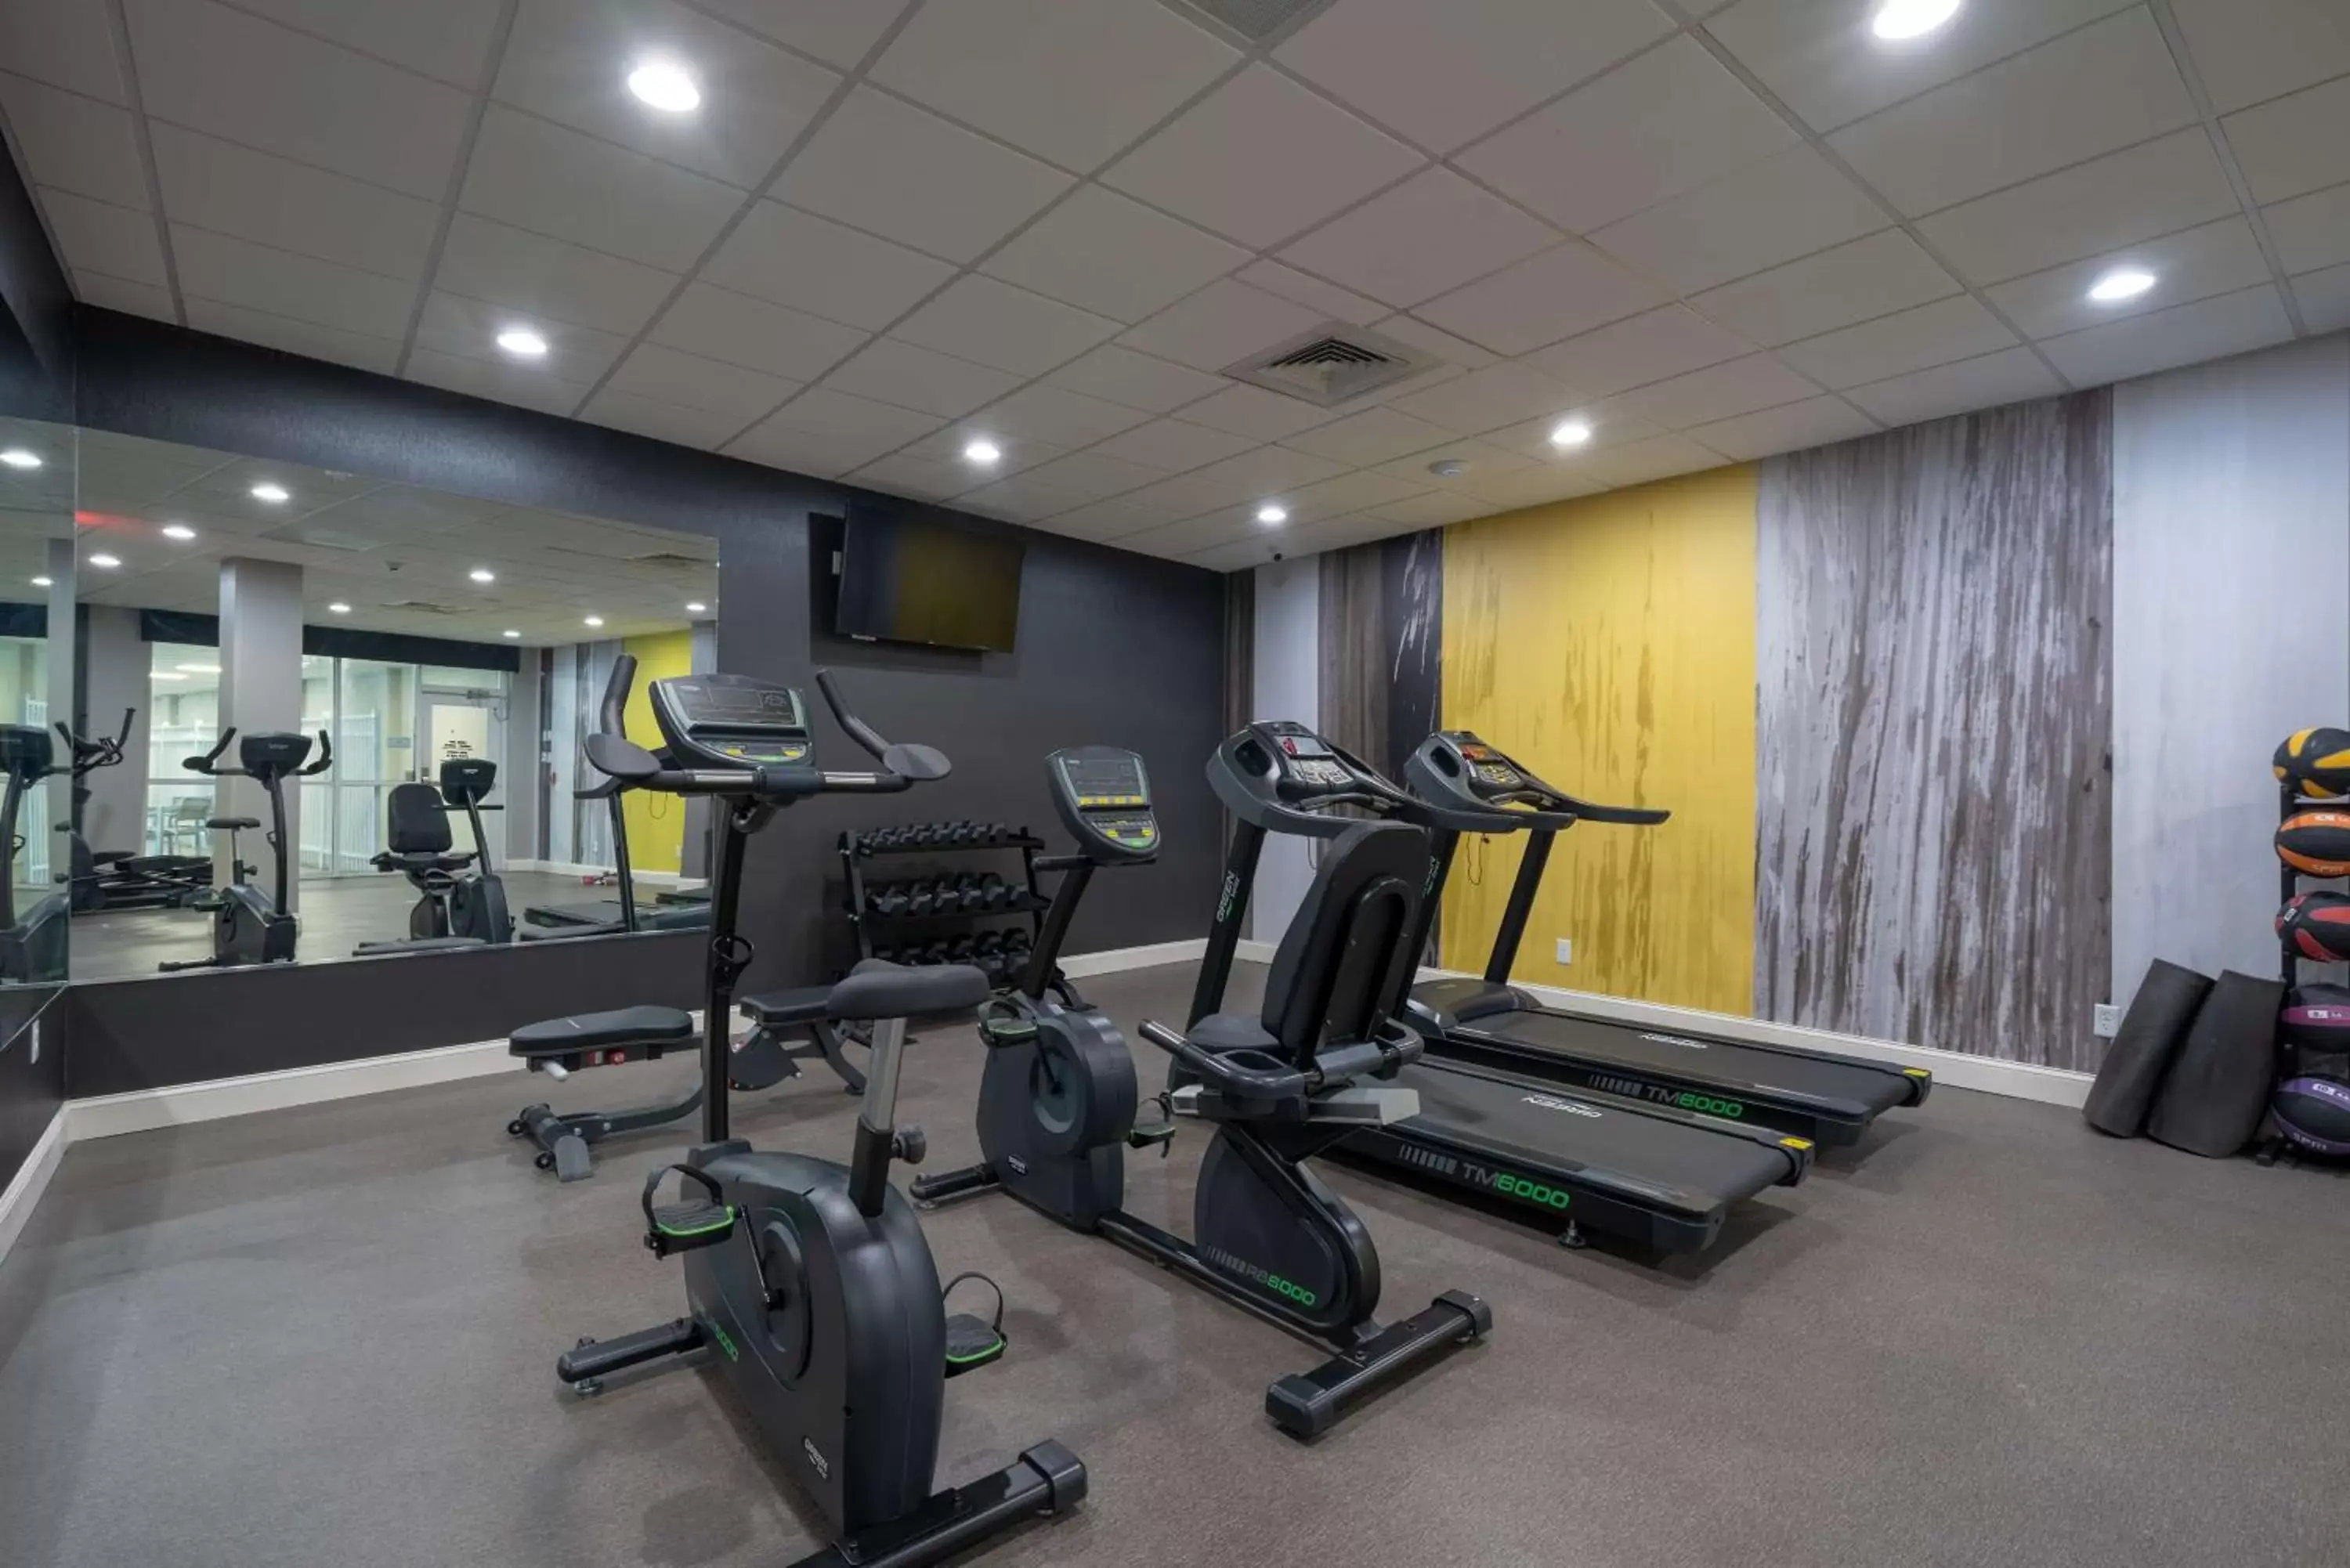 Fitness centre/facilities, Fitness Center/Facilities in Best Western Premier Airport/Expo Center Hotel